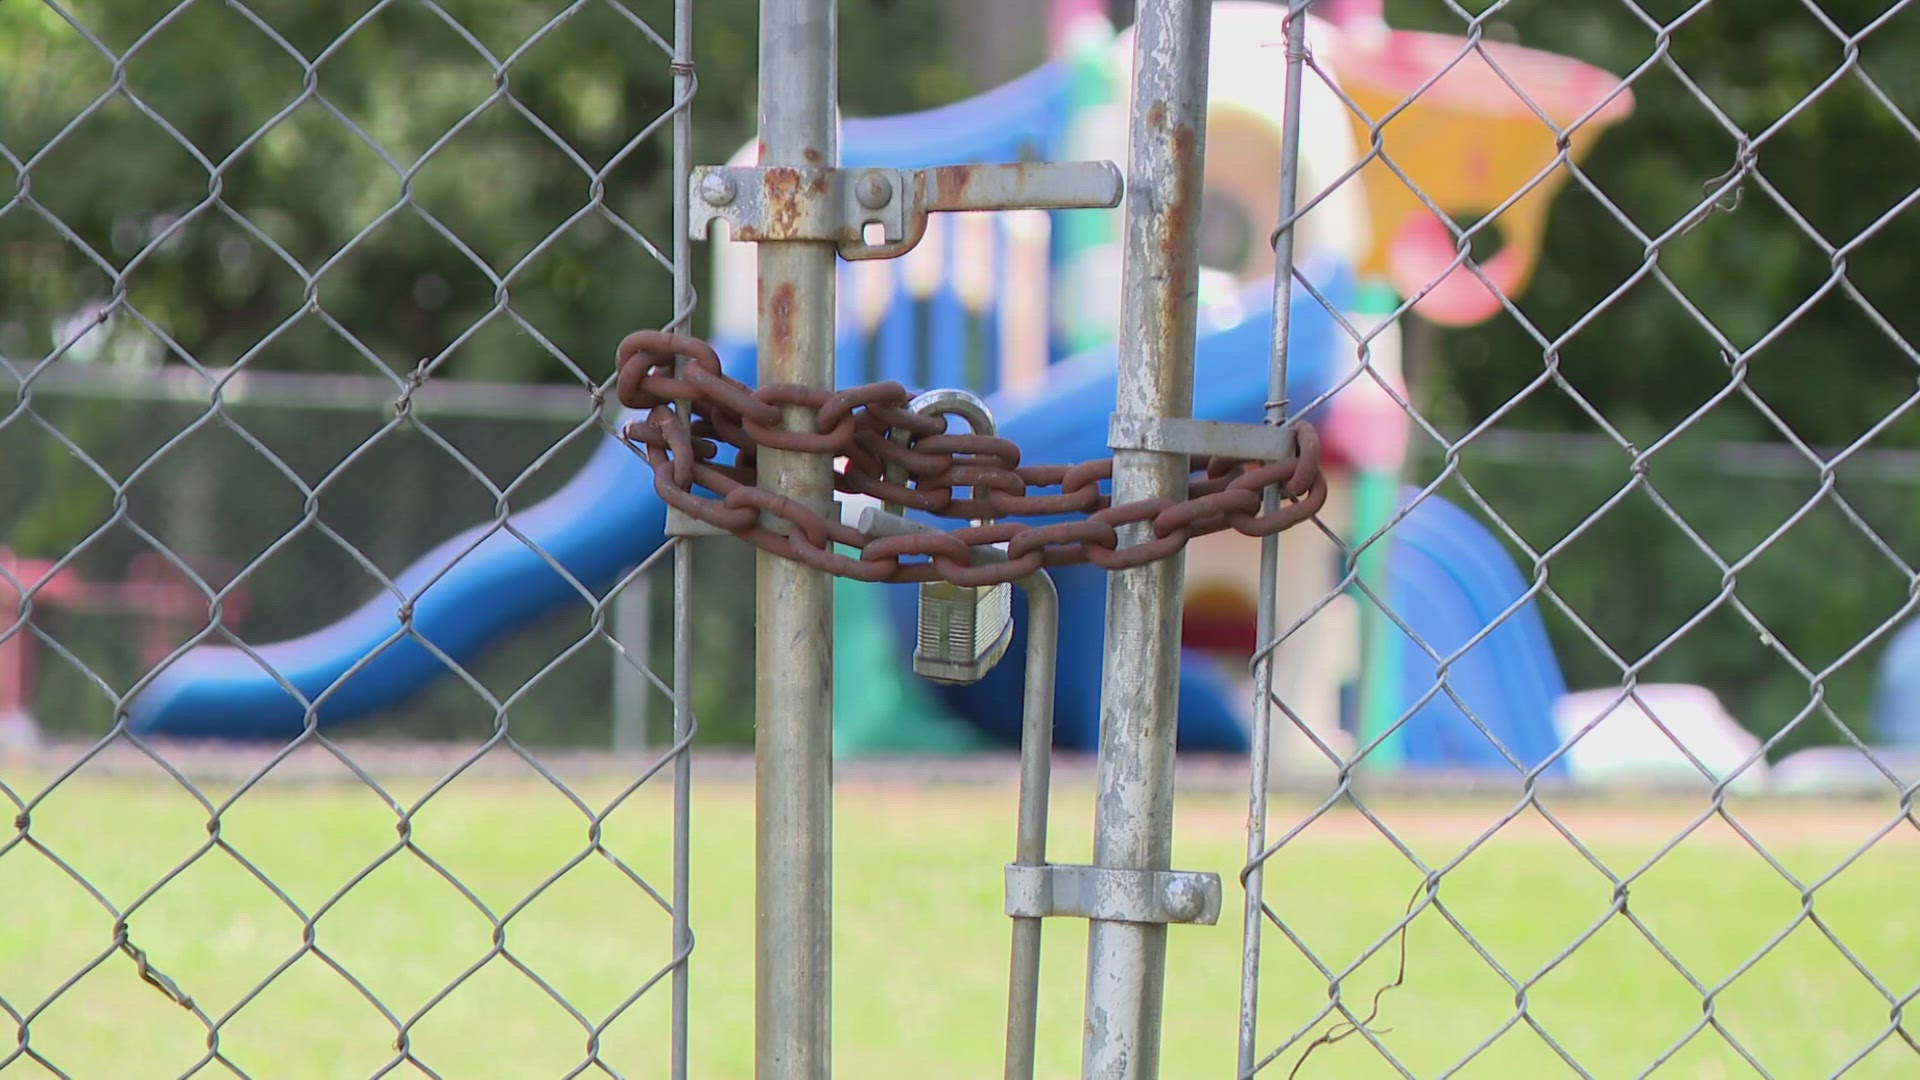 A mother is suing a day care center in north St. Louis County for abuse and neglect. She says her two children suffered physical, emotional and mental injuries.